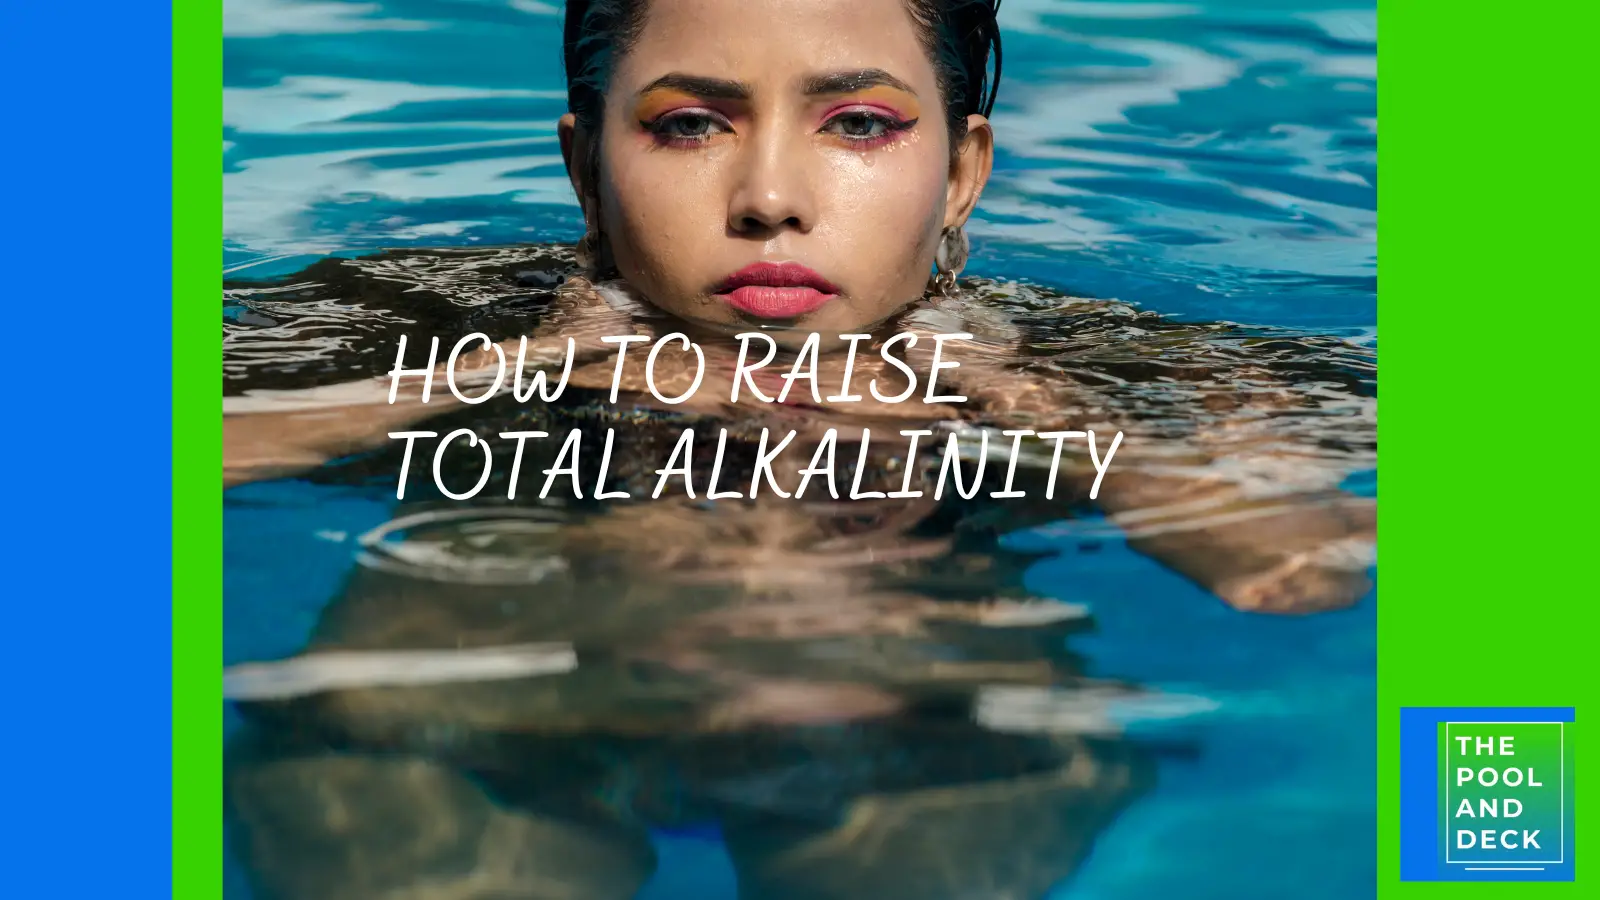 How to Raise Total Alkalinity in a Pool the Easy Way